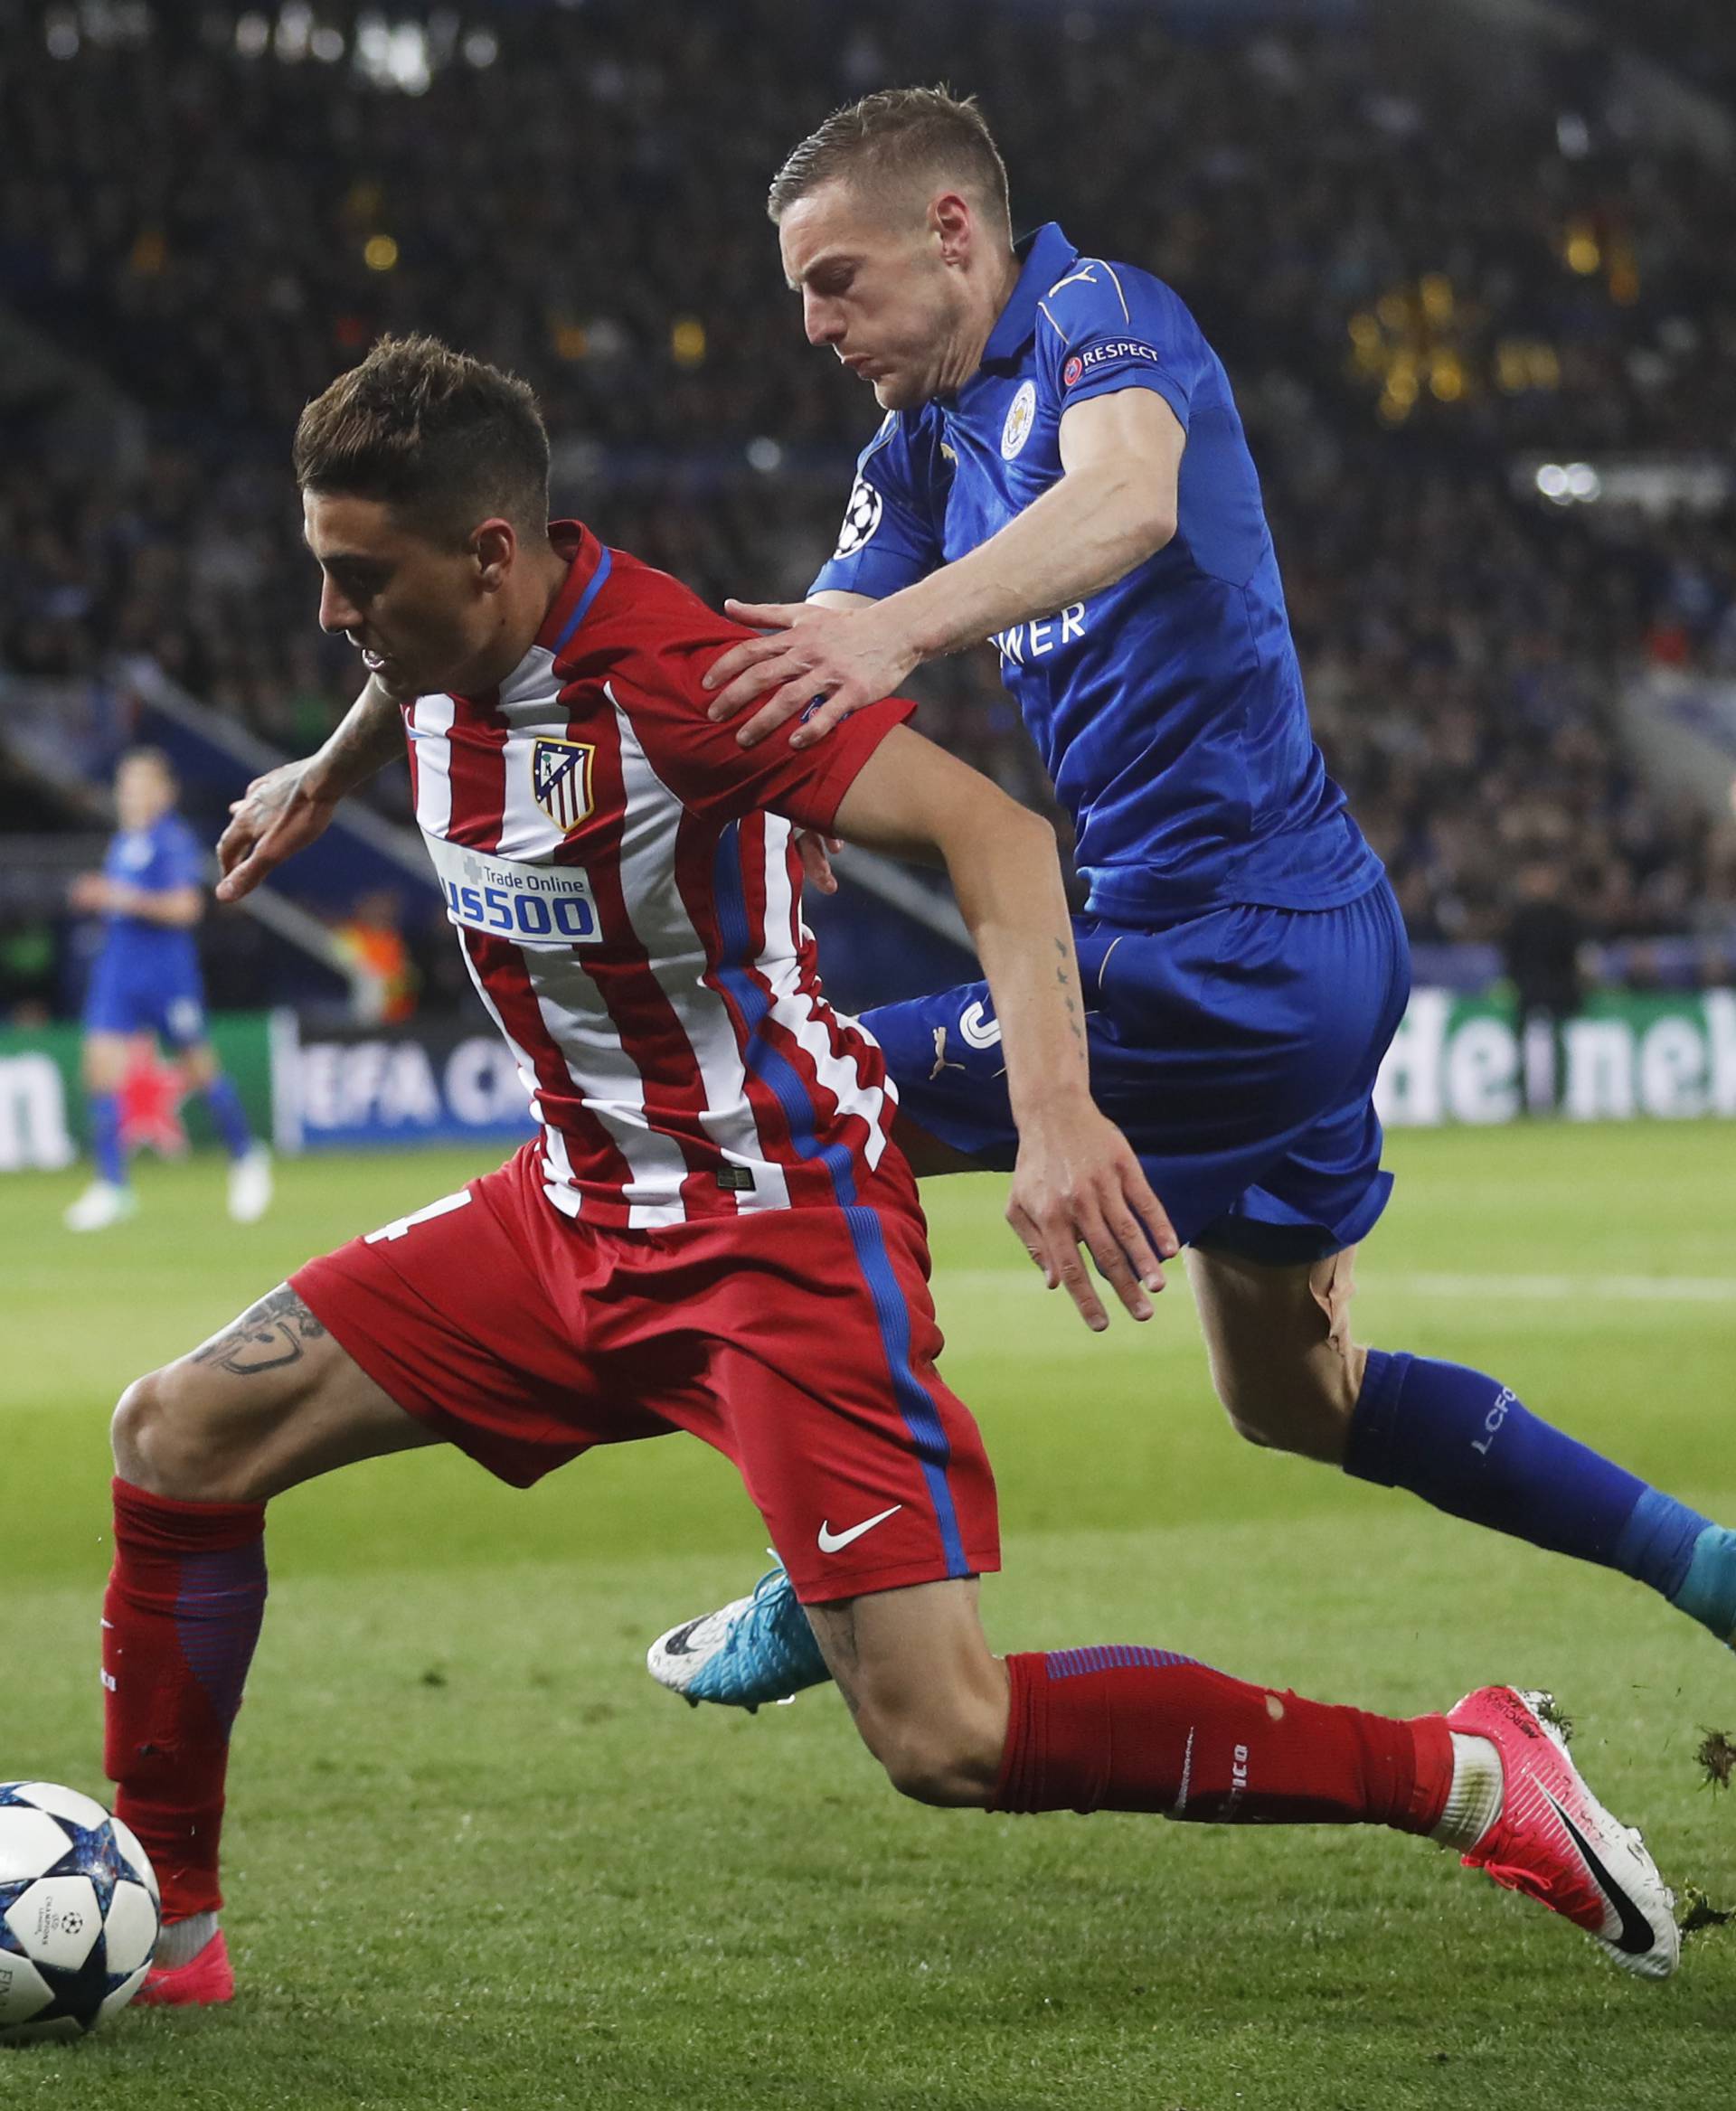 Atletico Madrid's Jose Gimenez in action with Leicester City's Jamie Vardy